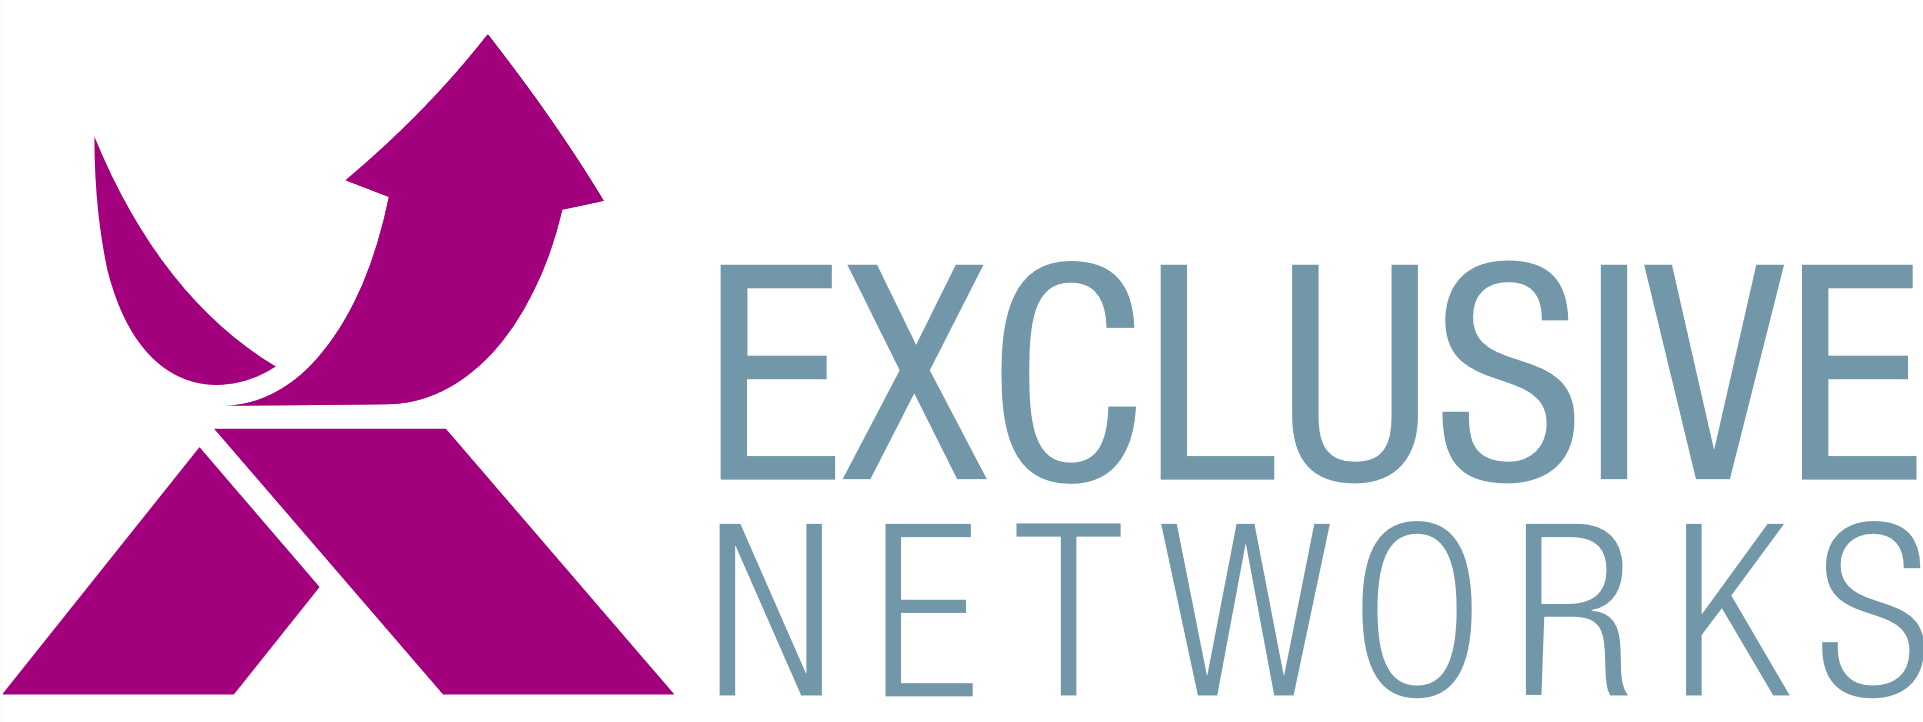 Exclusive_Networks_logo